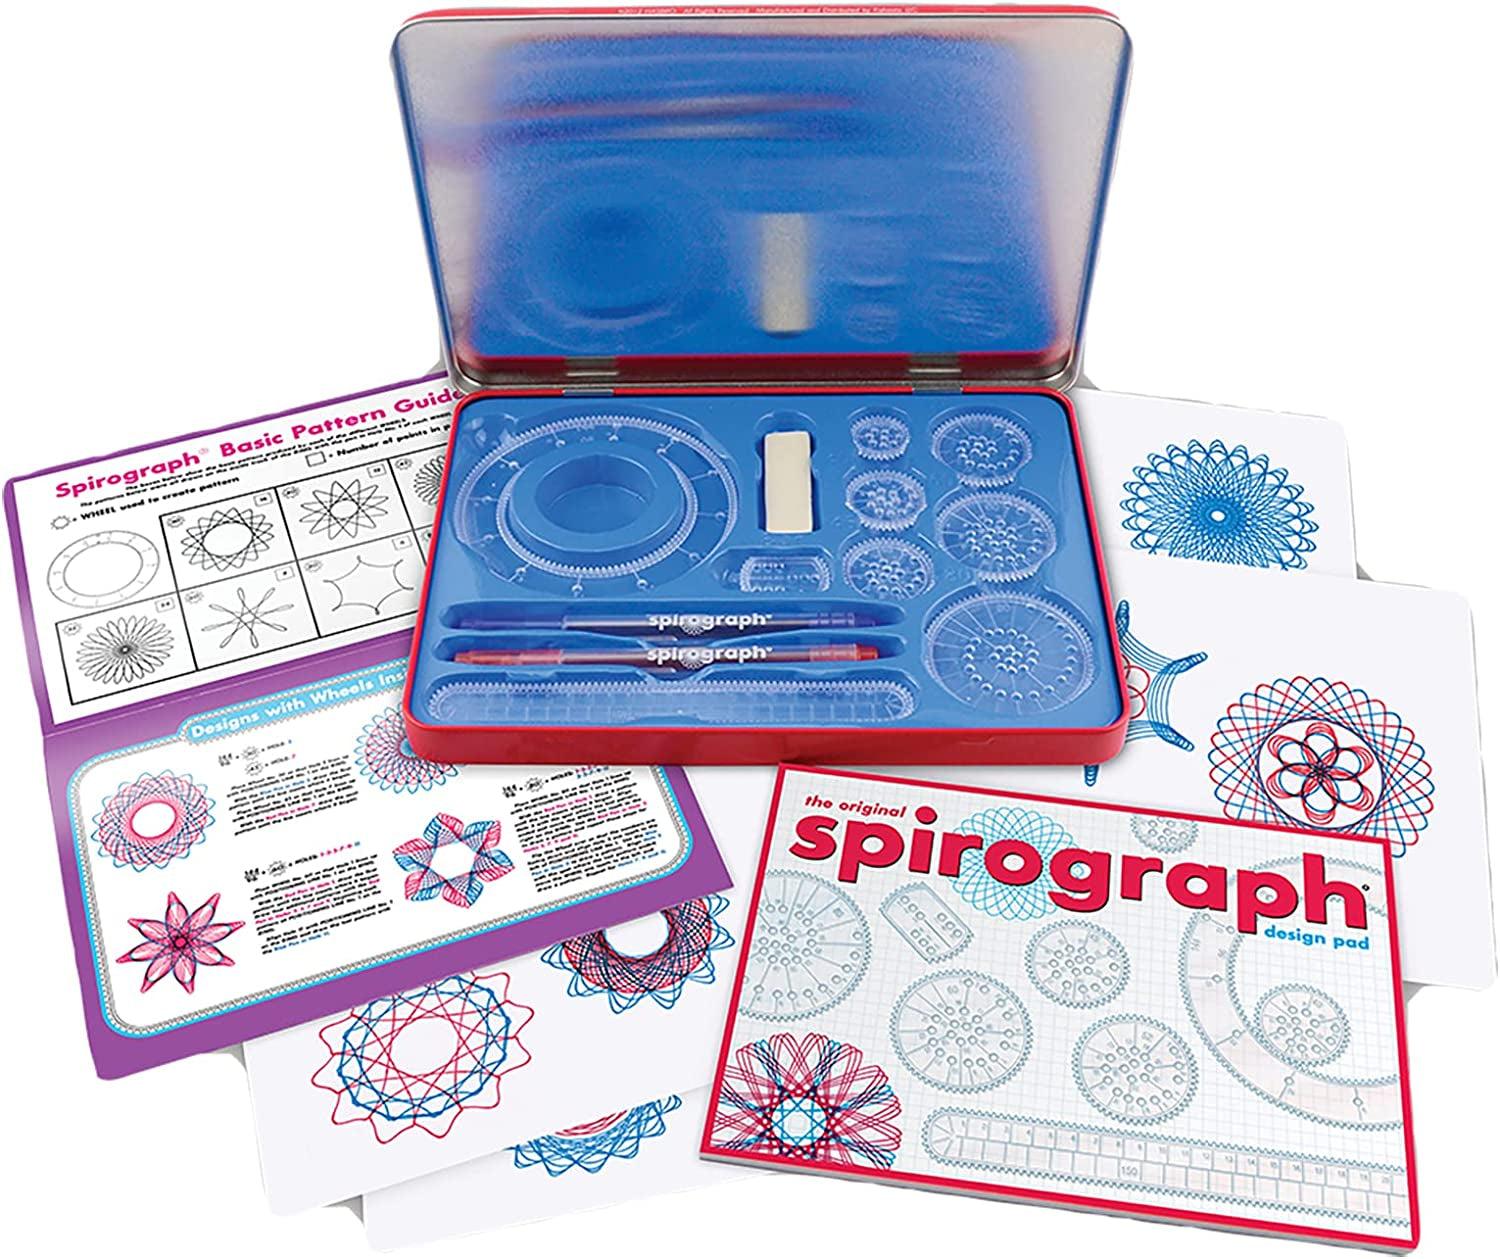 Spirograph Design Set Tin - Classic Gear Design Kit in a Collectors Tin - for Ages 8+